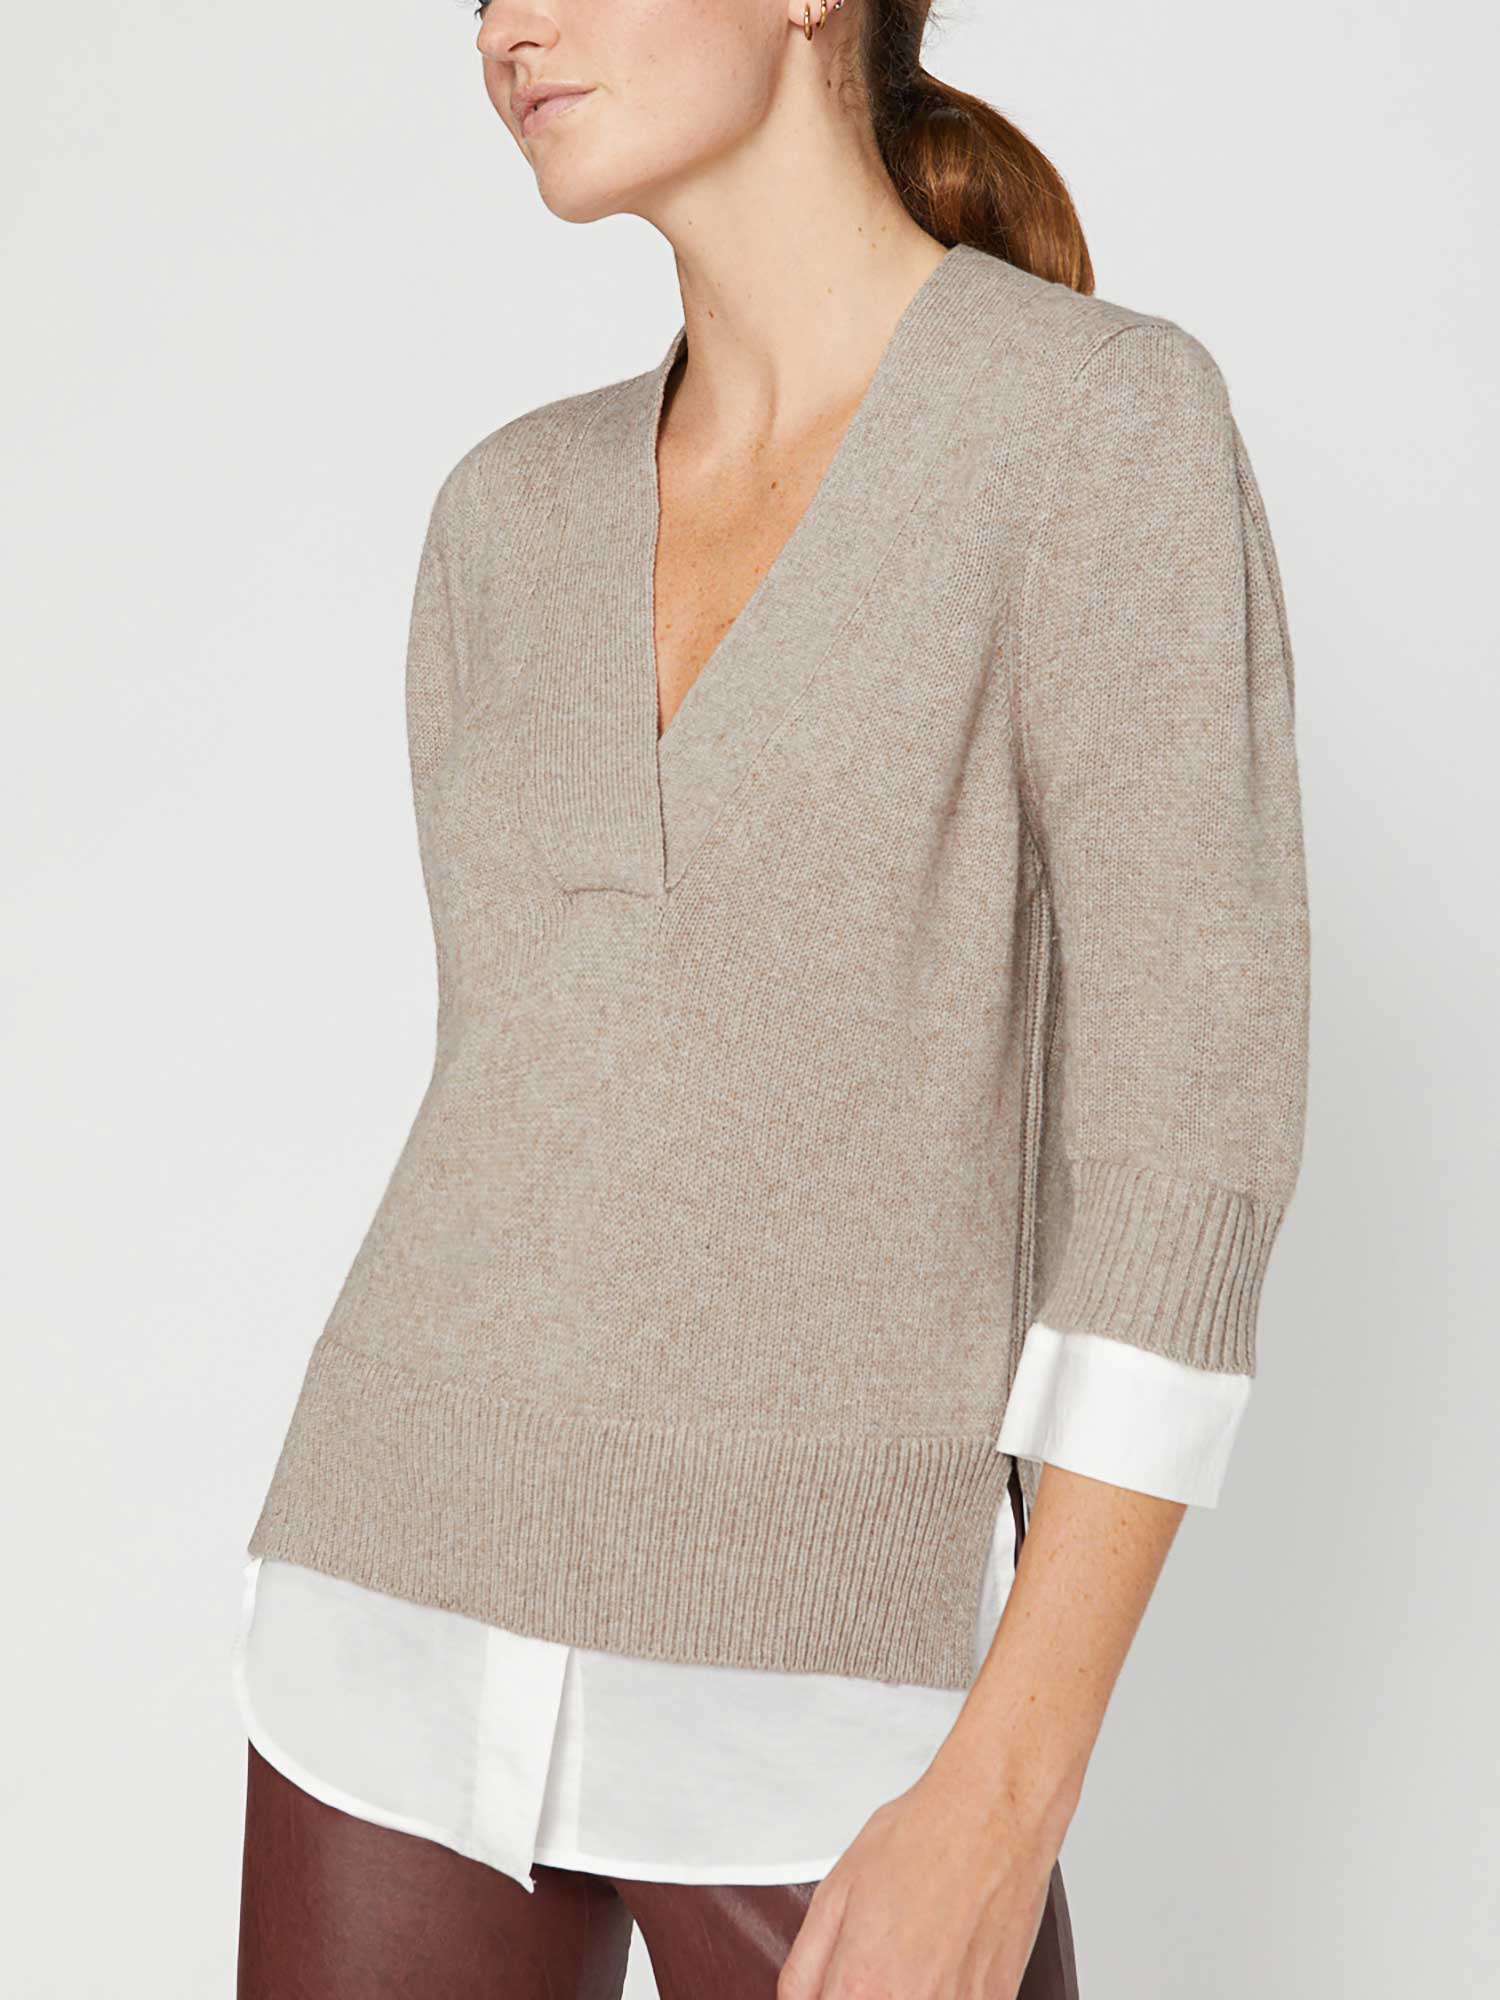 Lucie layered three-quarter sleeve v-neck sweater side view 2